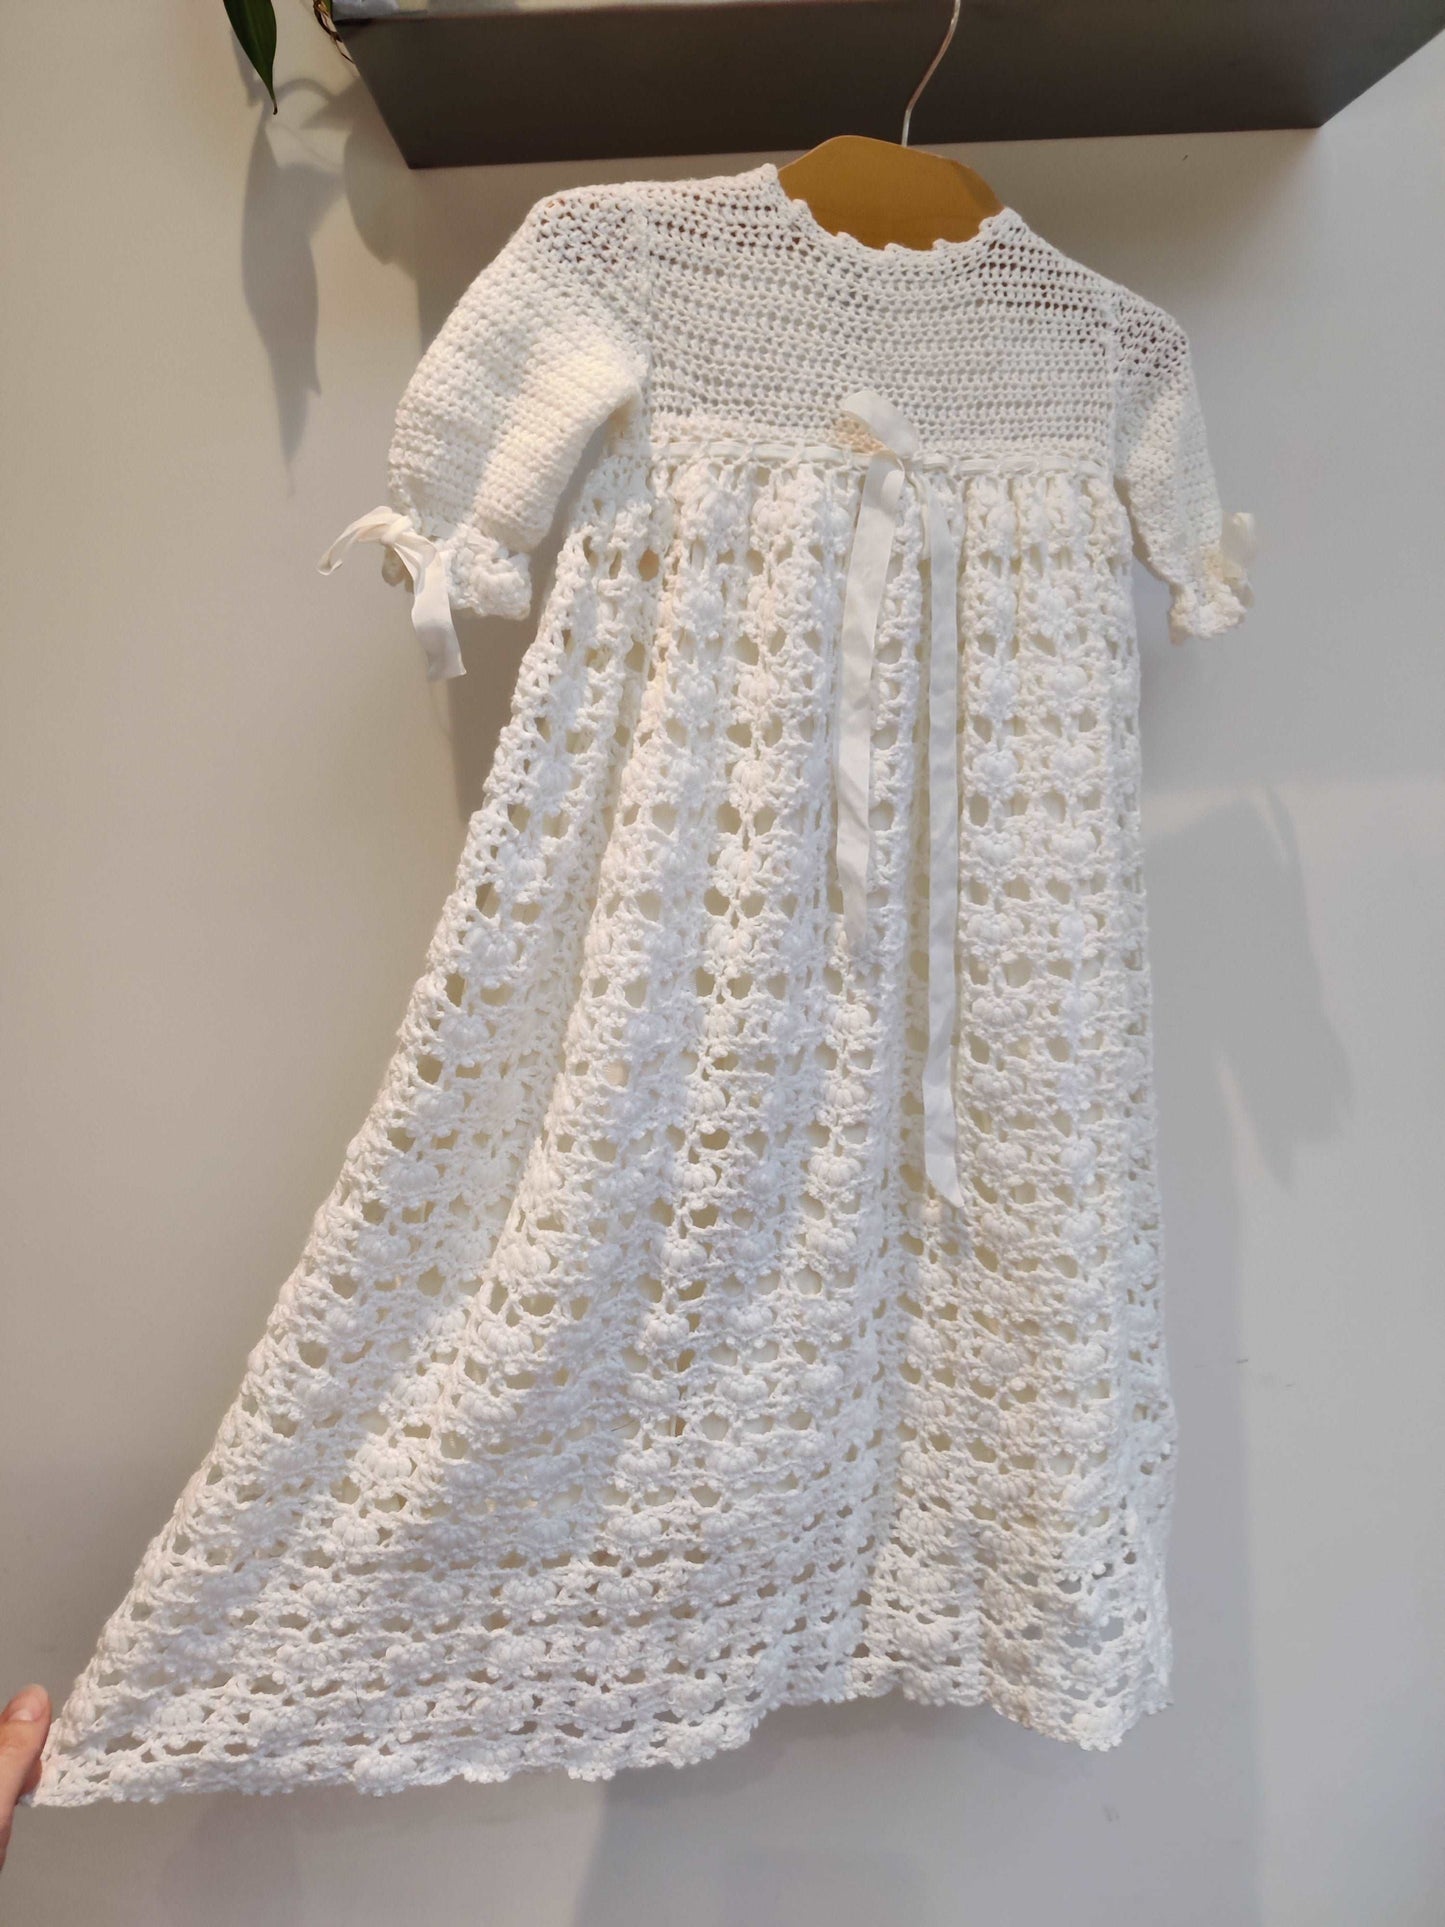 Stunning christening dress with matching cardigan and hat